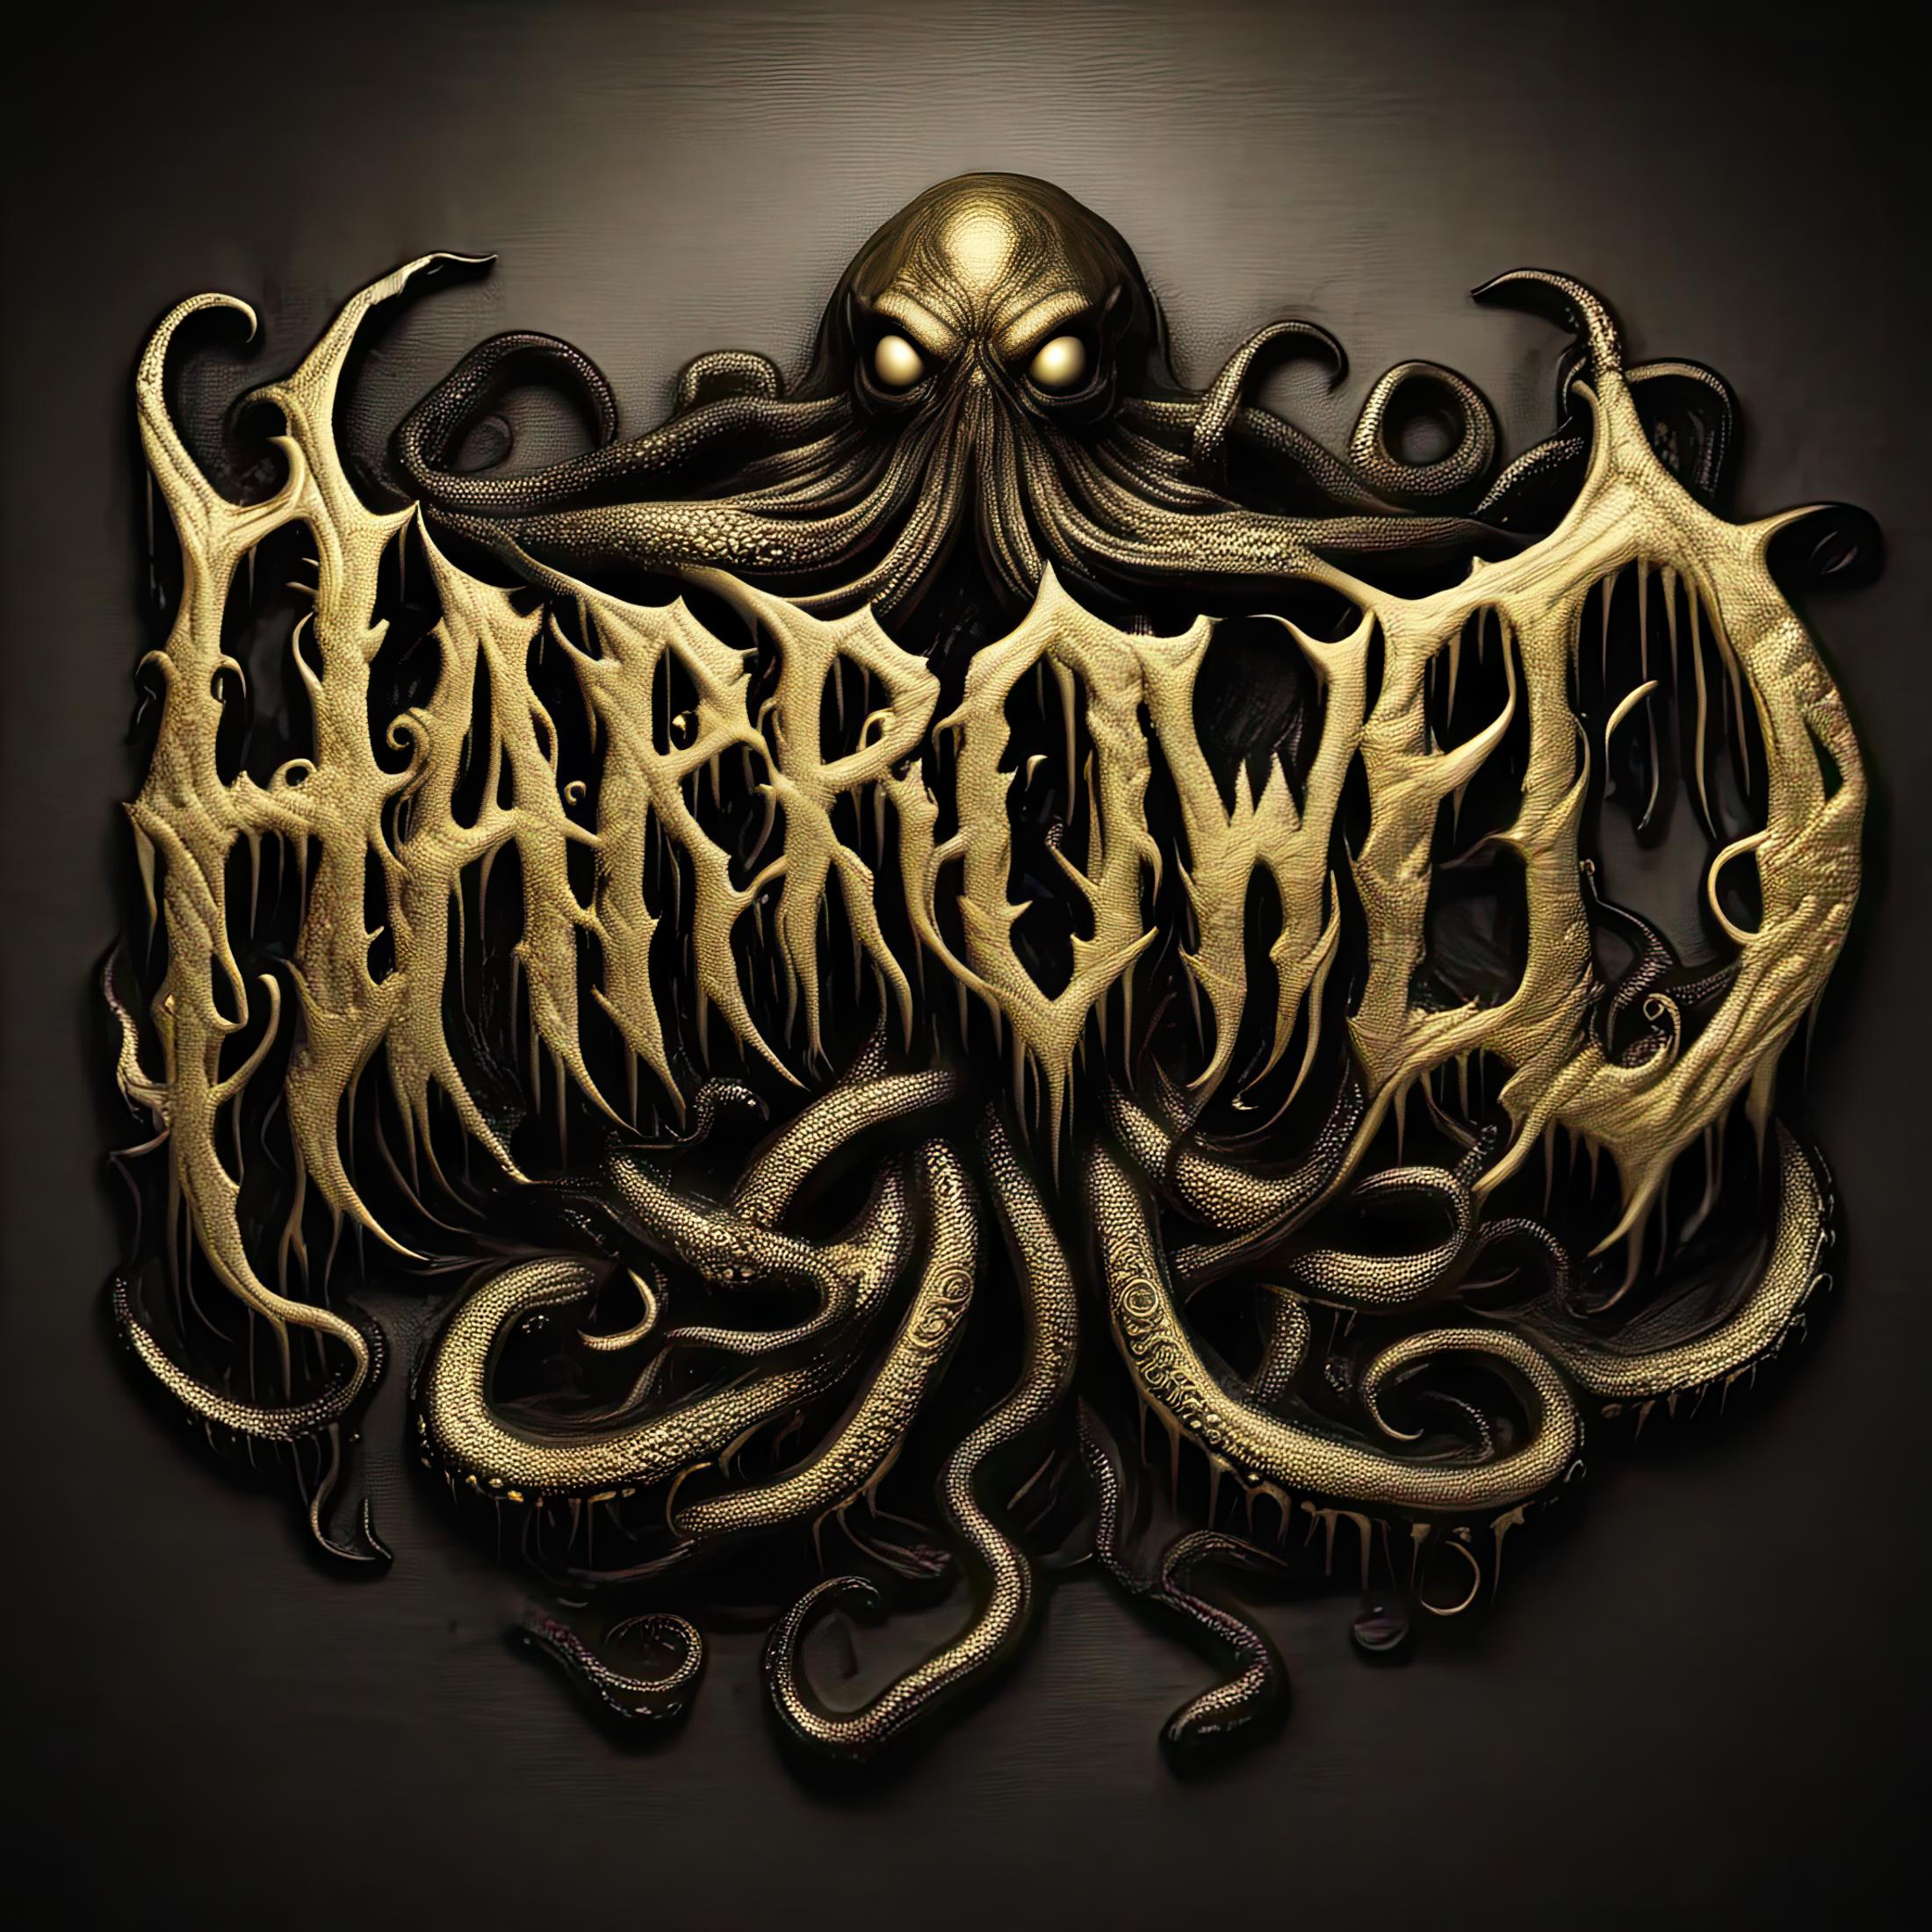 A monster logo for the name Harrowed.